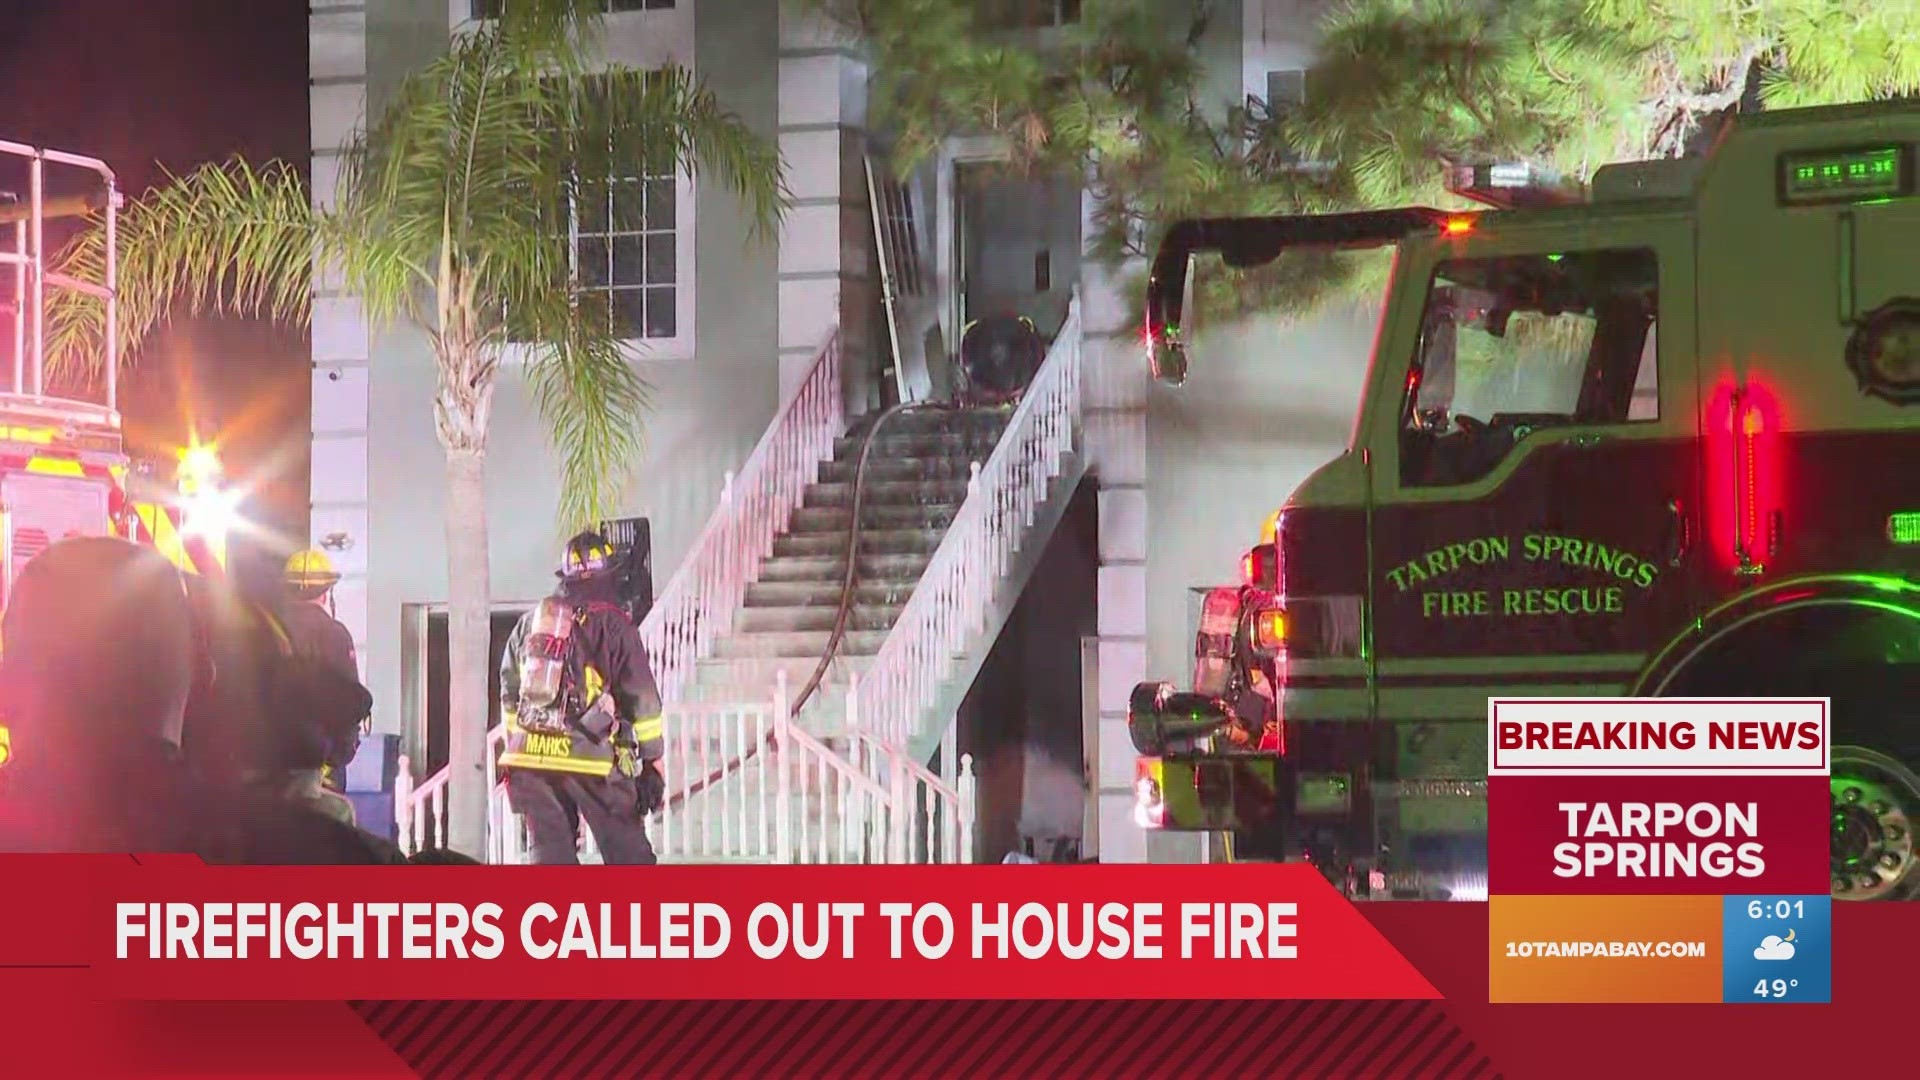 Firefighters have put out a house fire at Tarpon Springs. The family that lived there got out safely.